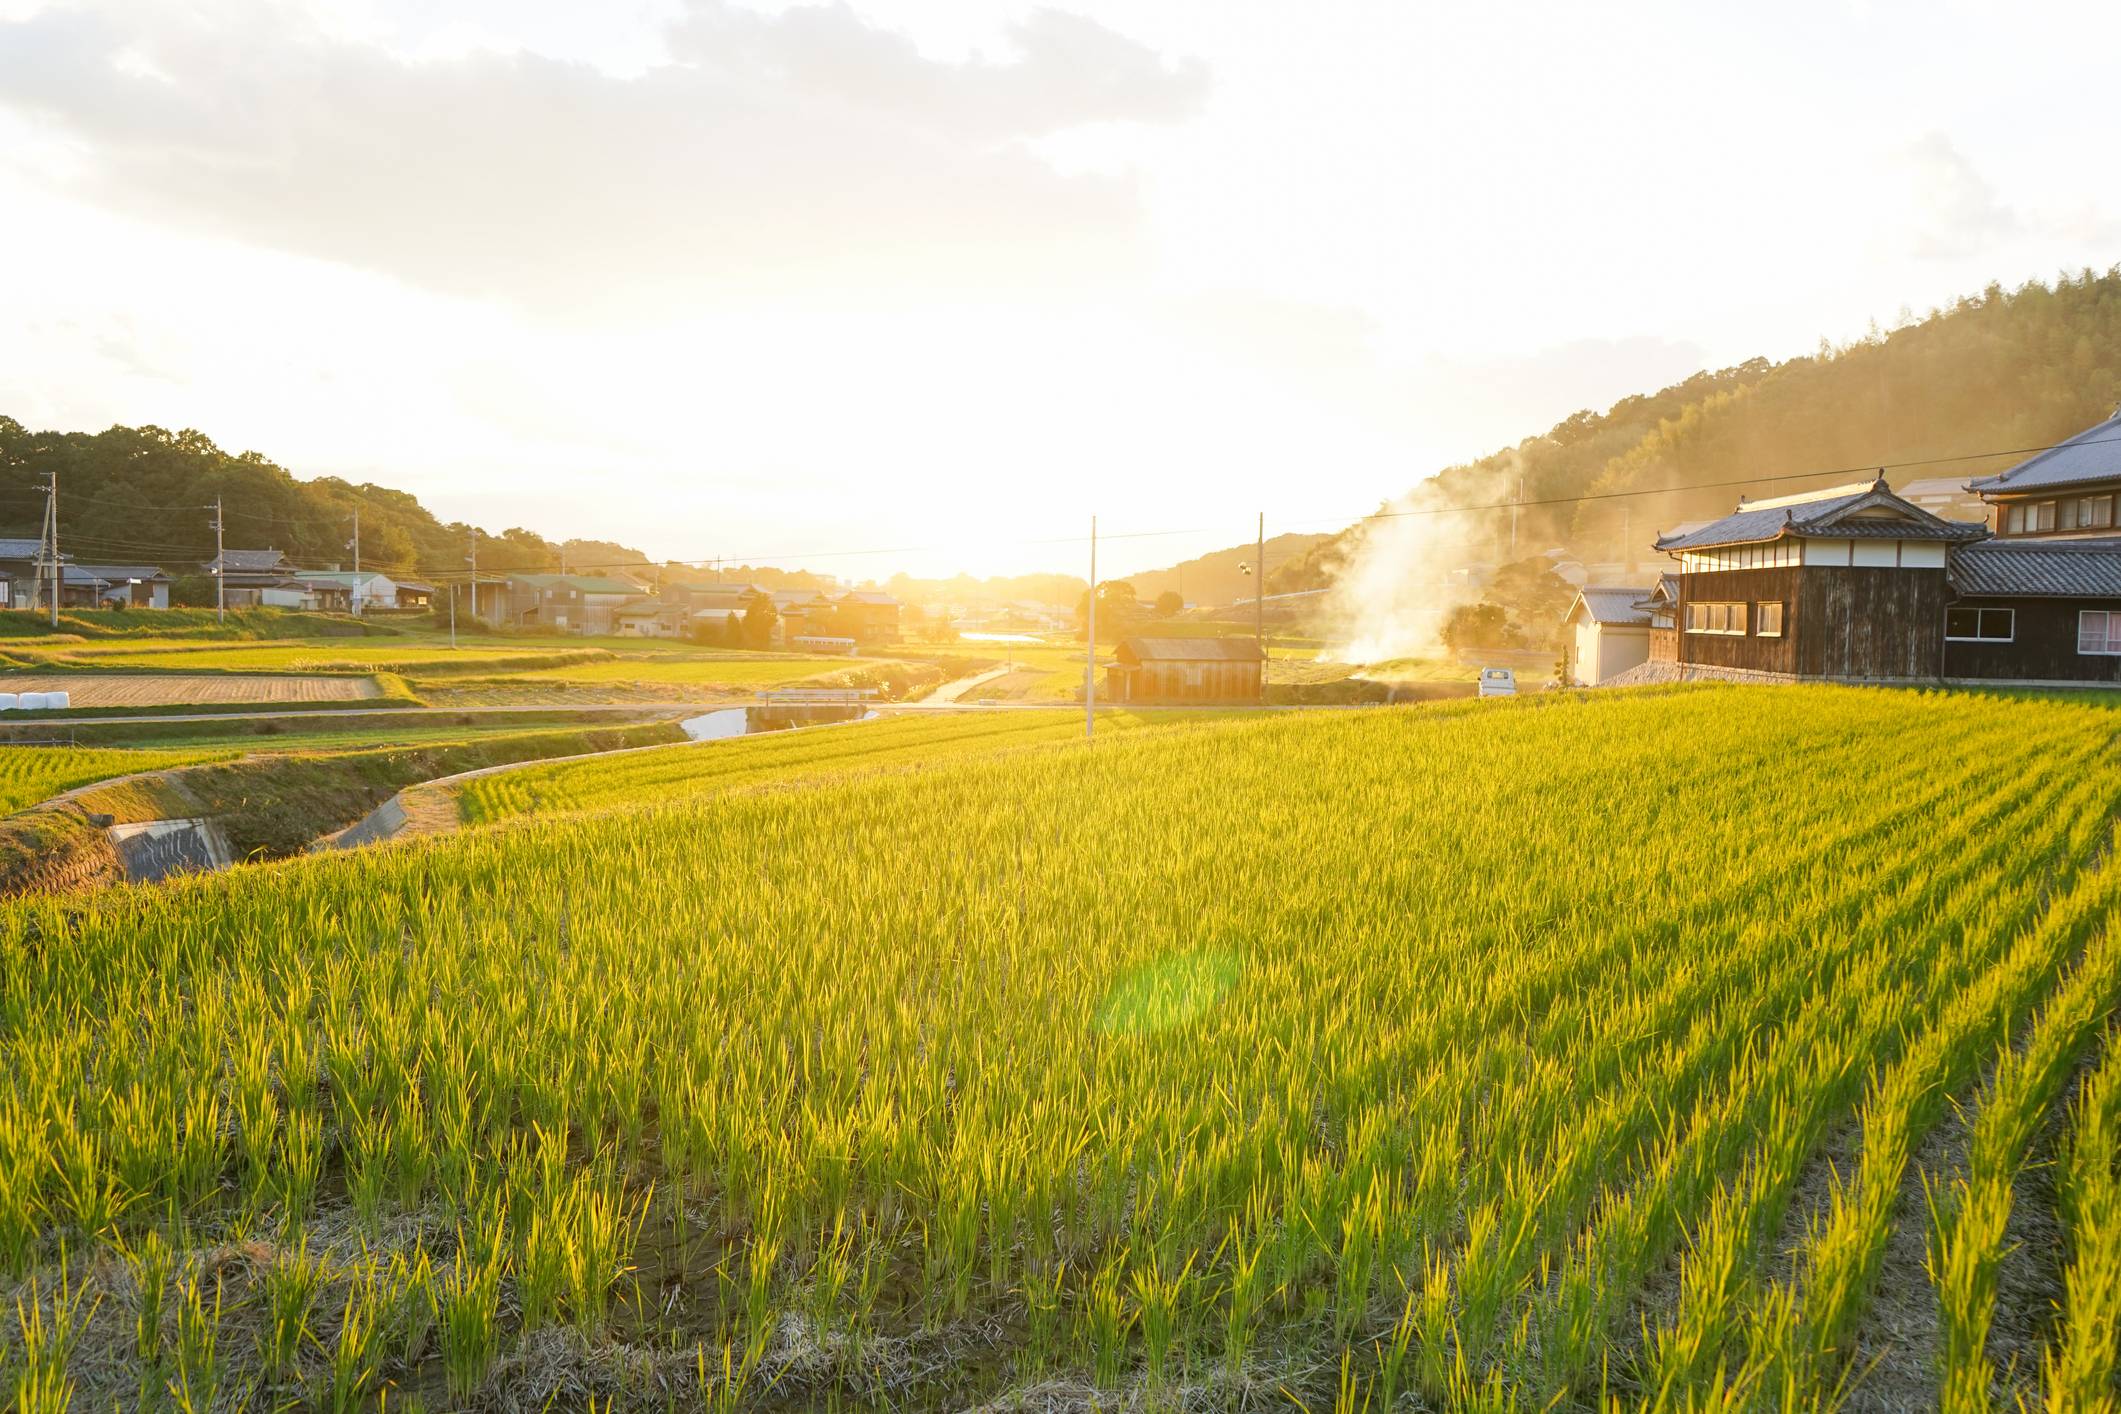 The simple life: A more rural lifestyle is gaining appeal with some Japanese urbanites. | GETTY IMAGES